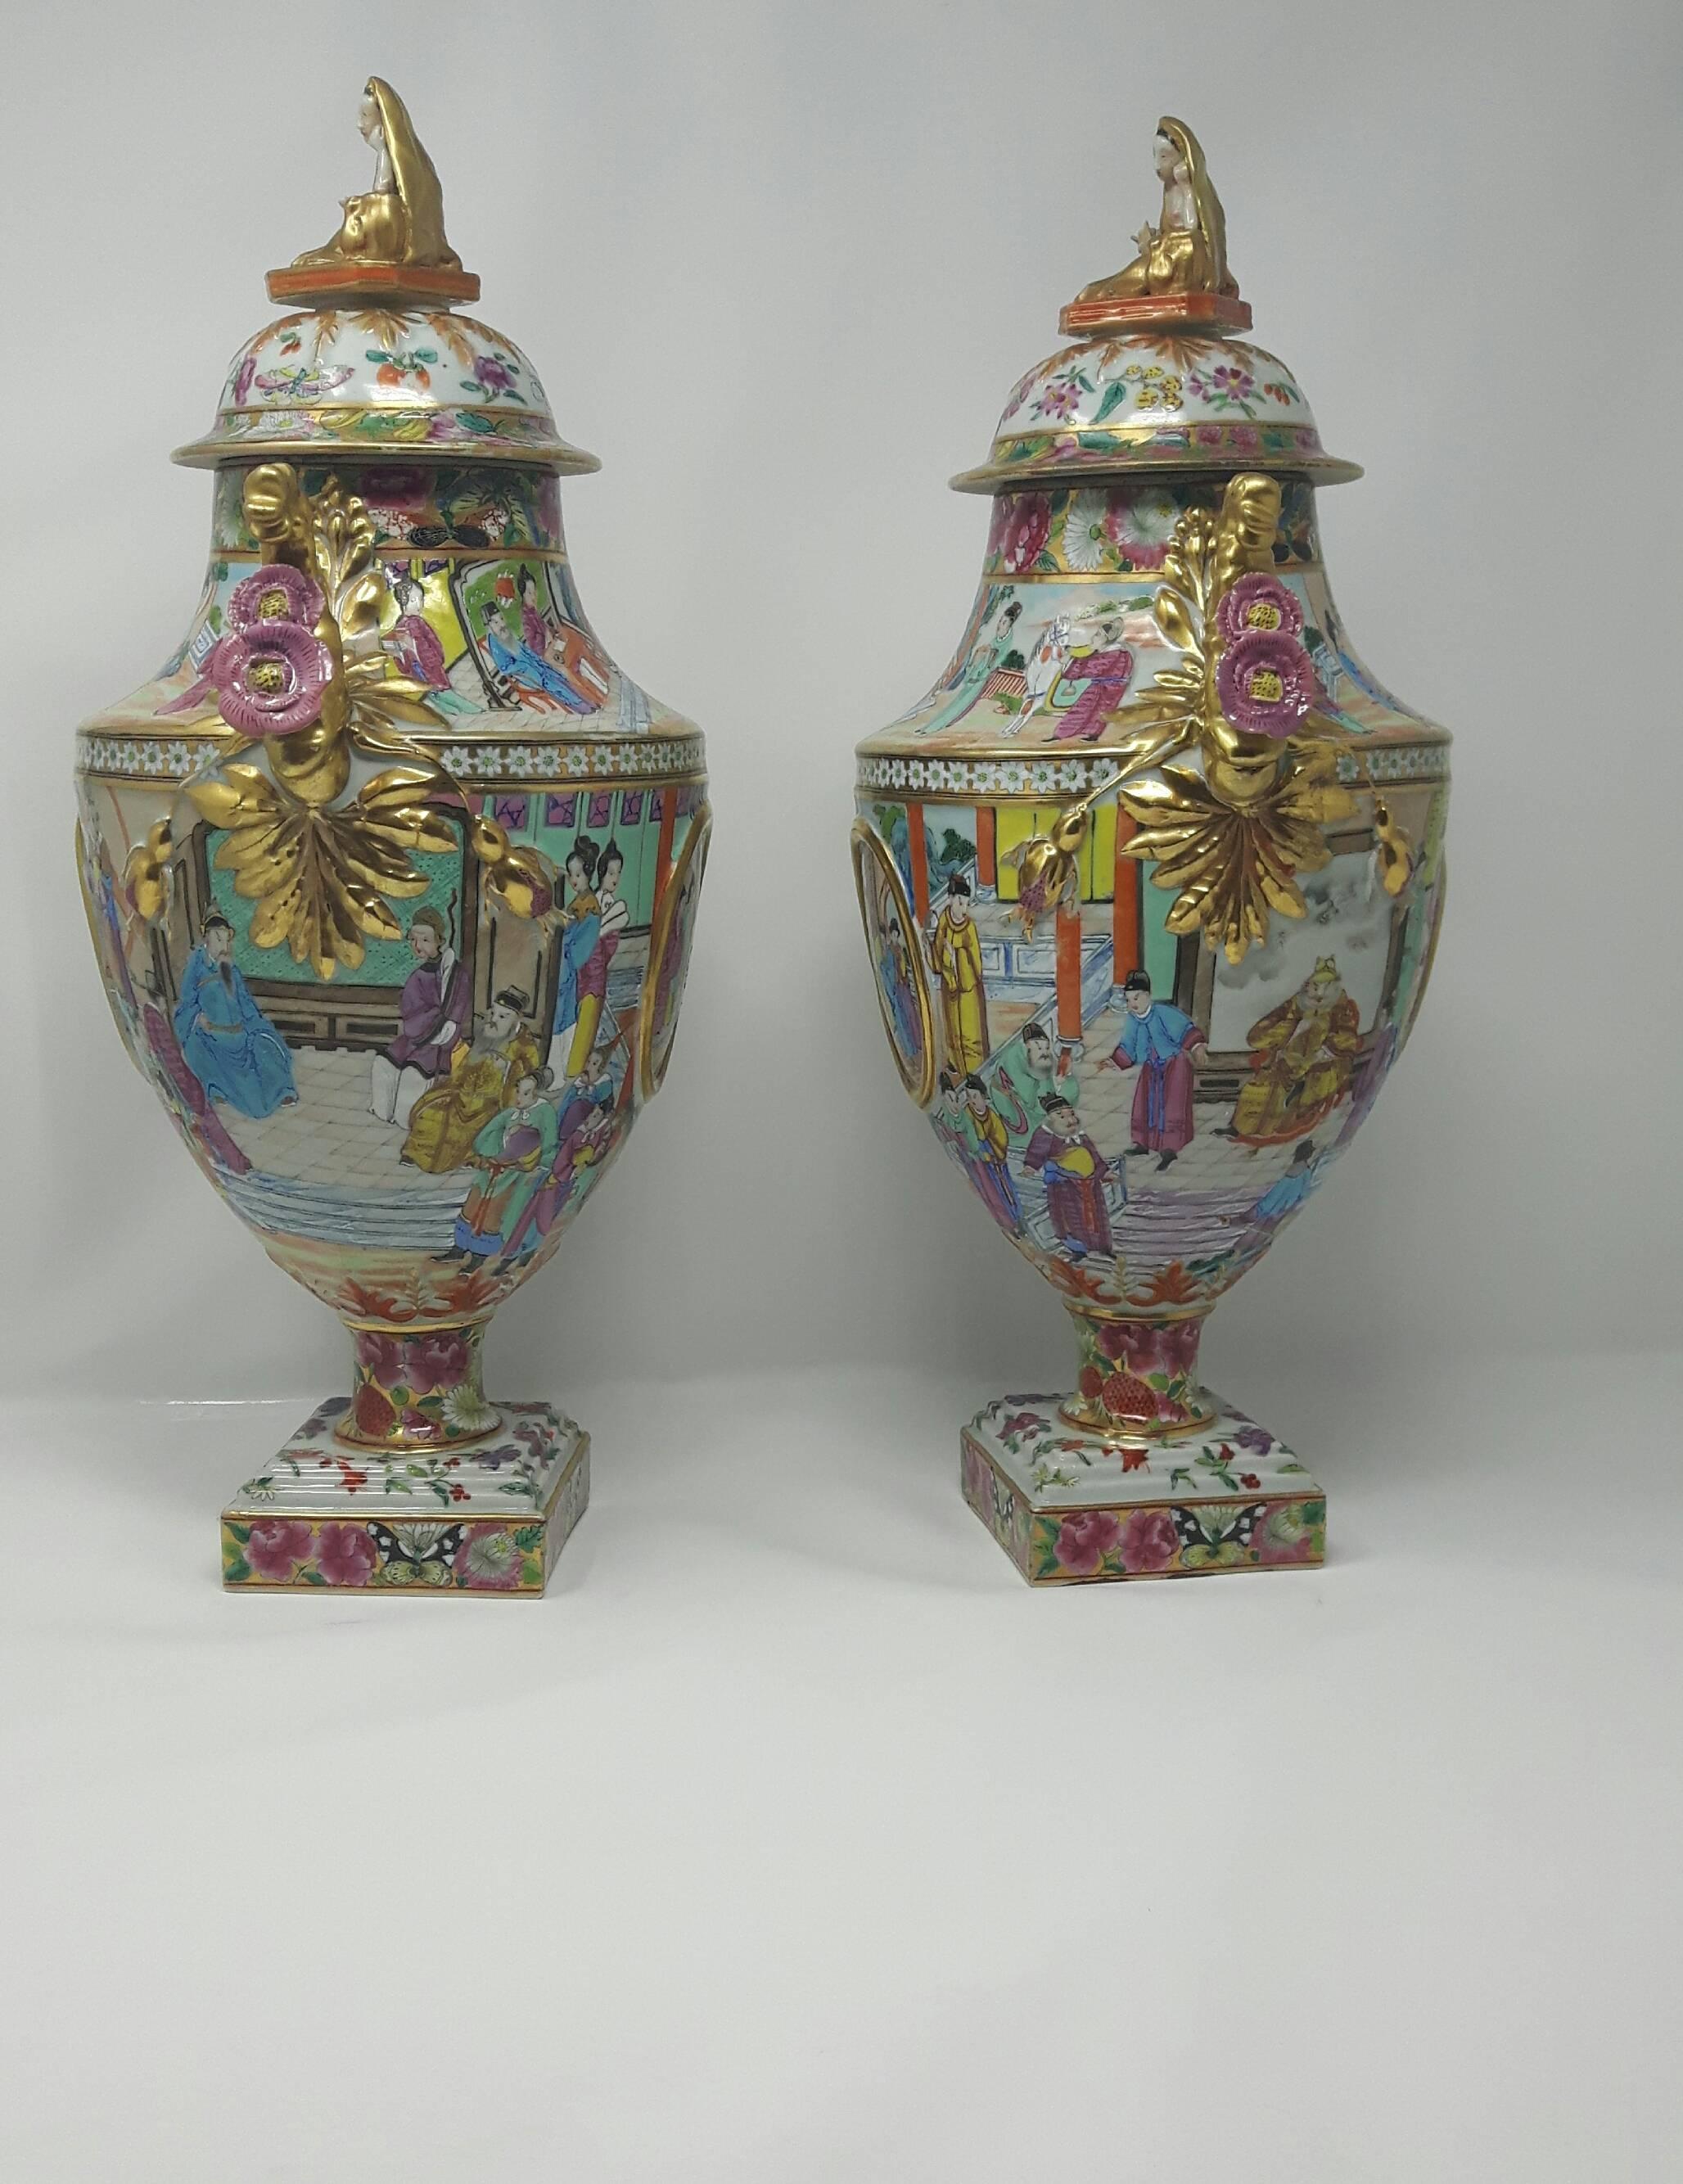 A rare pair of Chinese export European shaped porcelain vases plus covers cantonb enamel decorated.